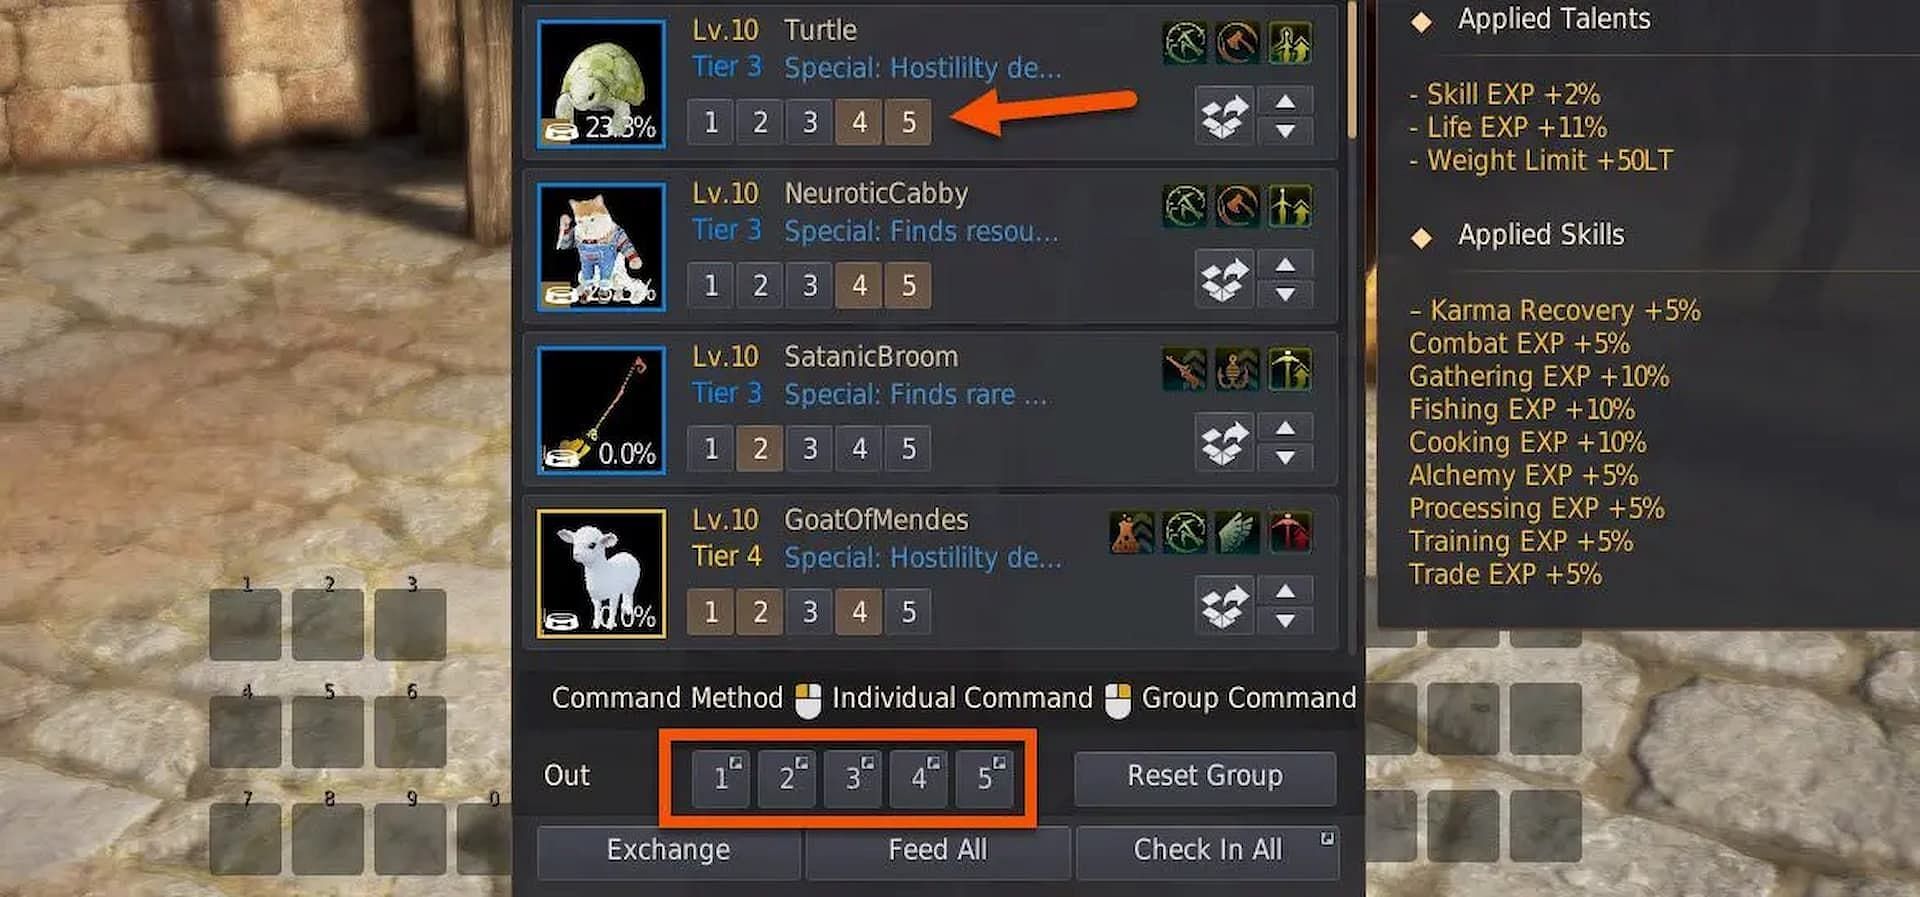 You will need to exchange a certain number of low-tier pets to get a high-tier one (Image via Pearl Abyss)